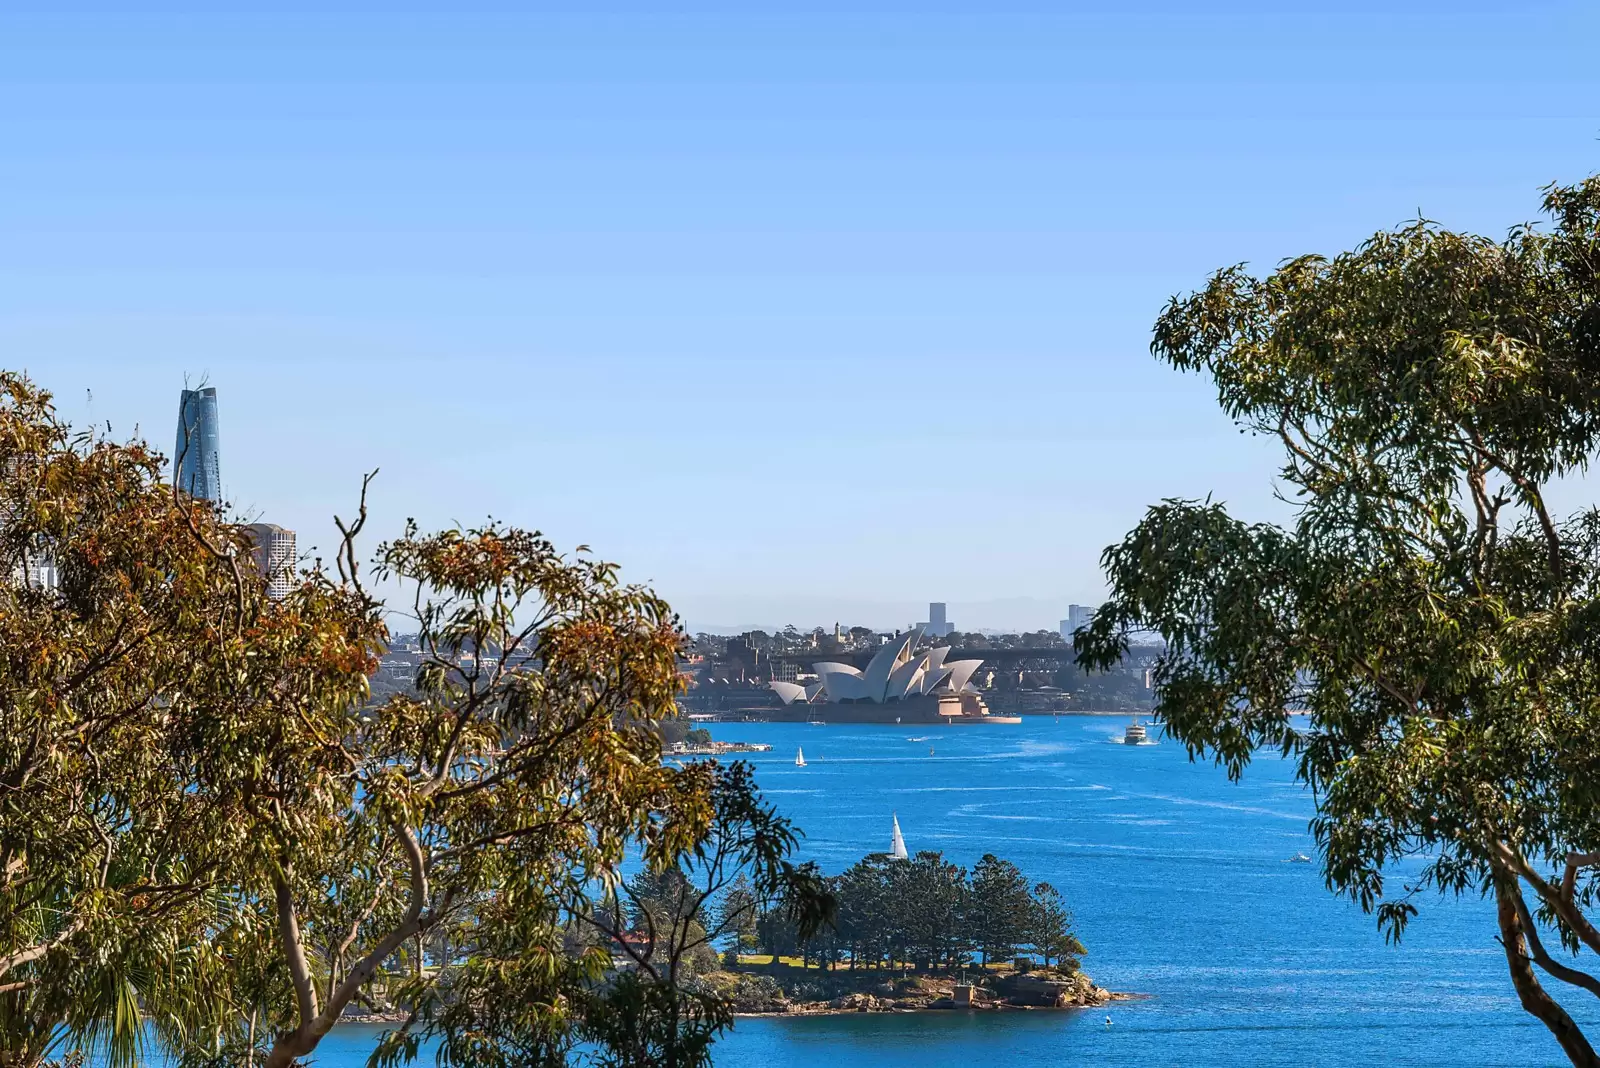 Photo #13: 25 Gilliver Avenue, Vaucluse - Sold by Sydney Sotheby's International Realty